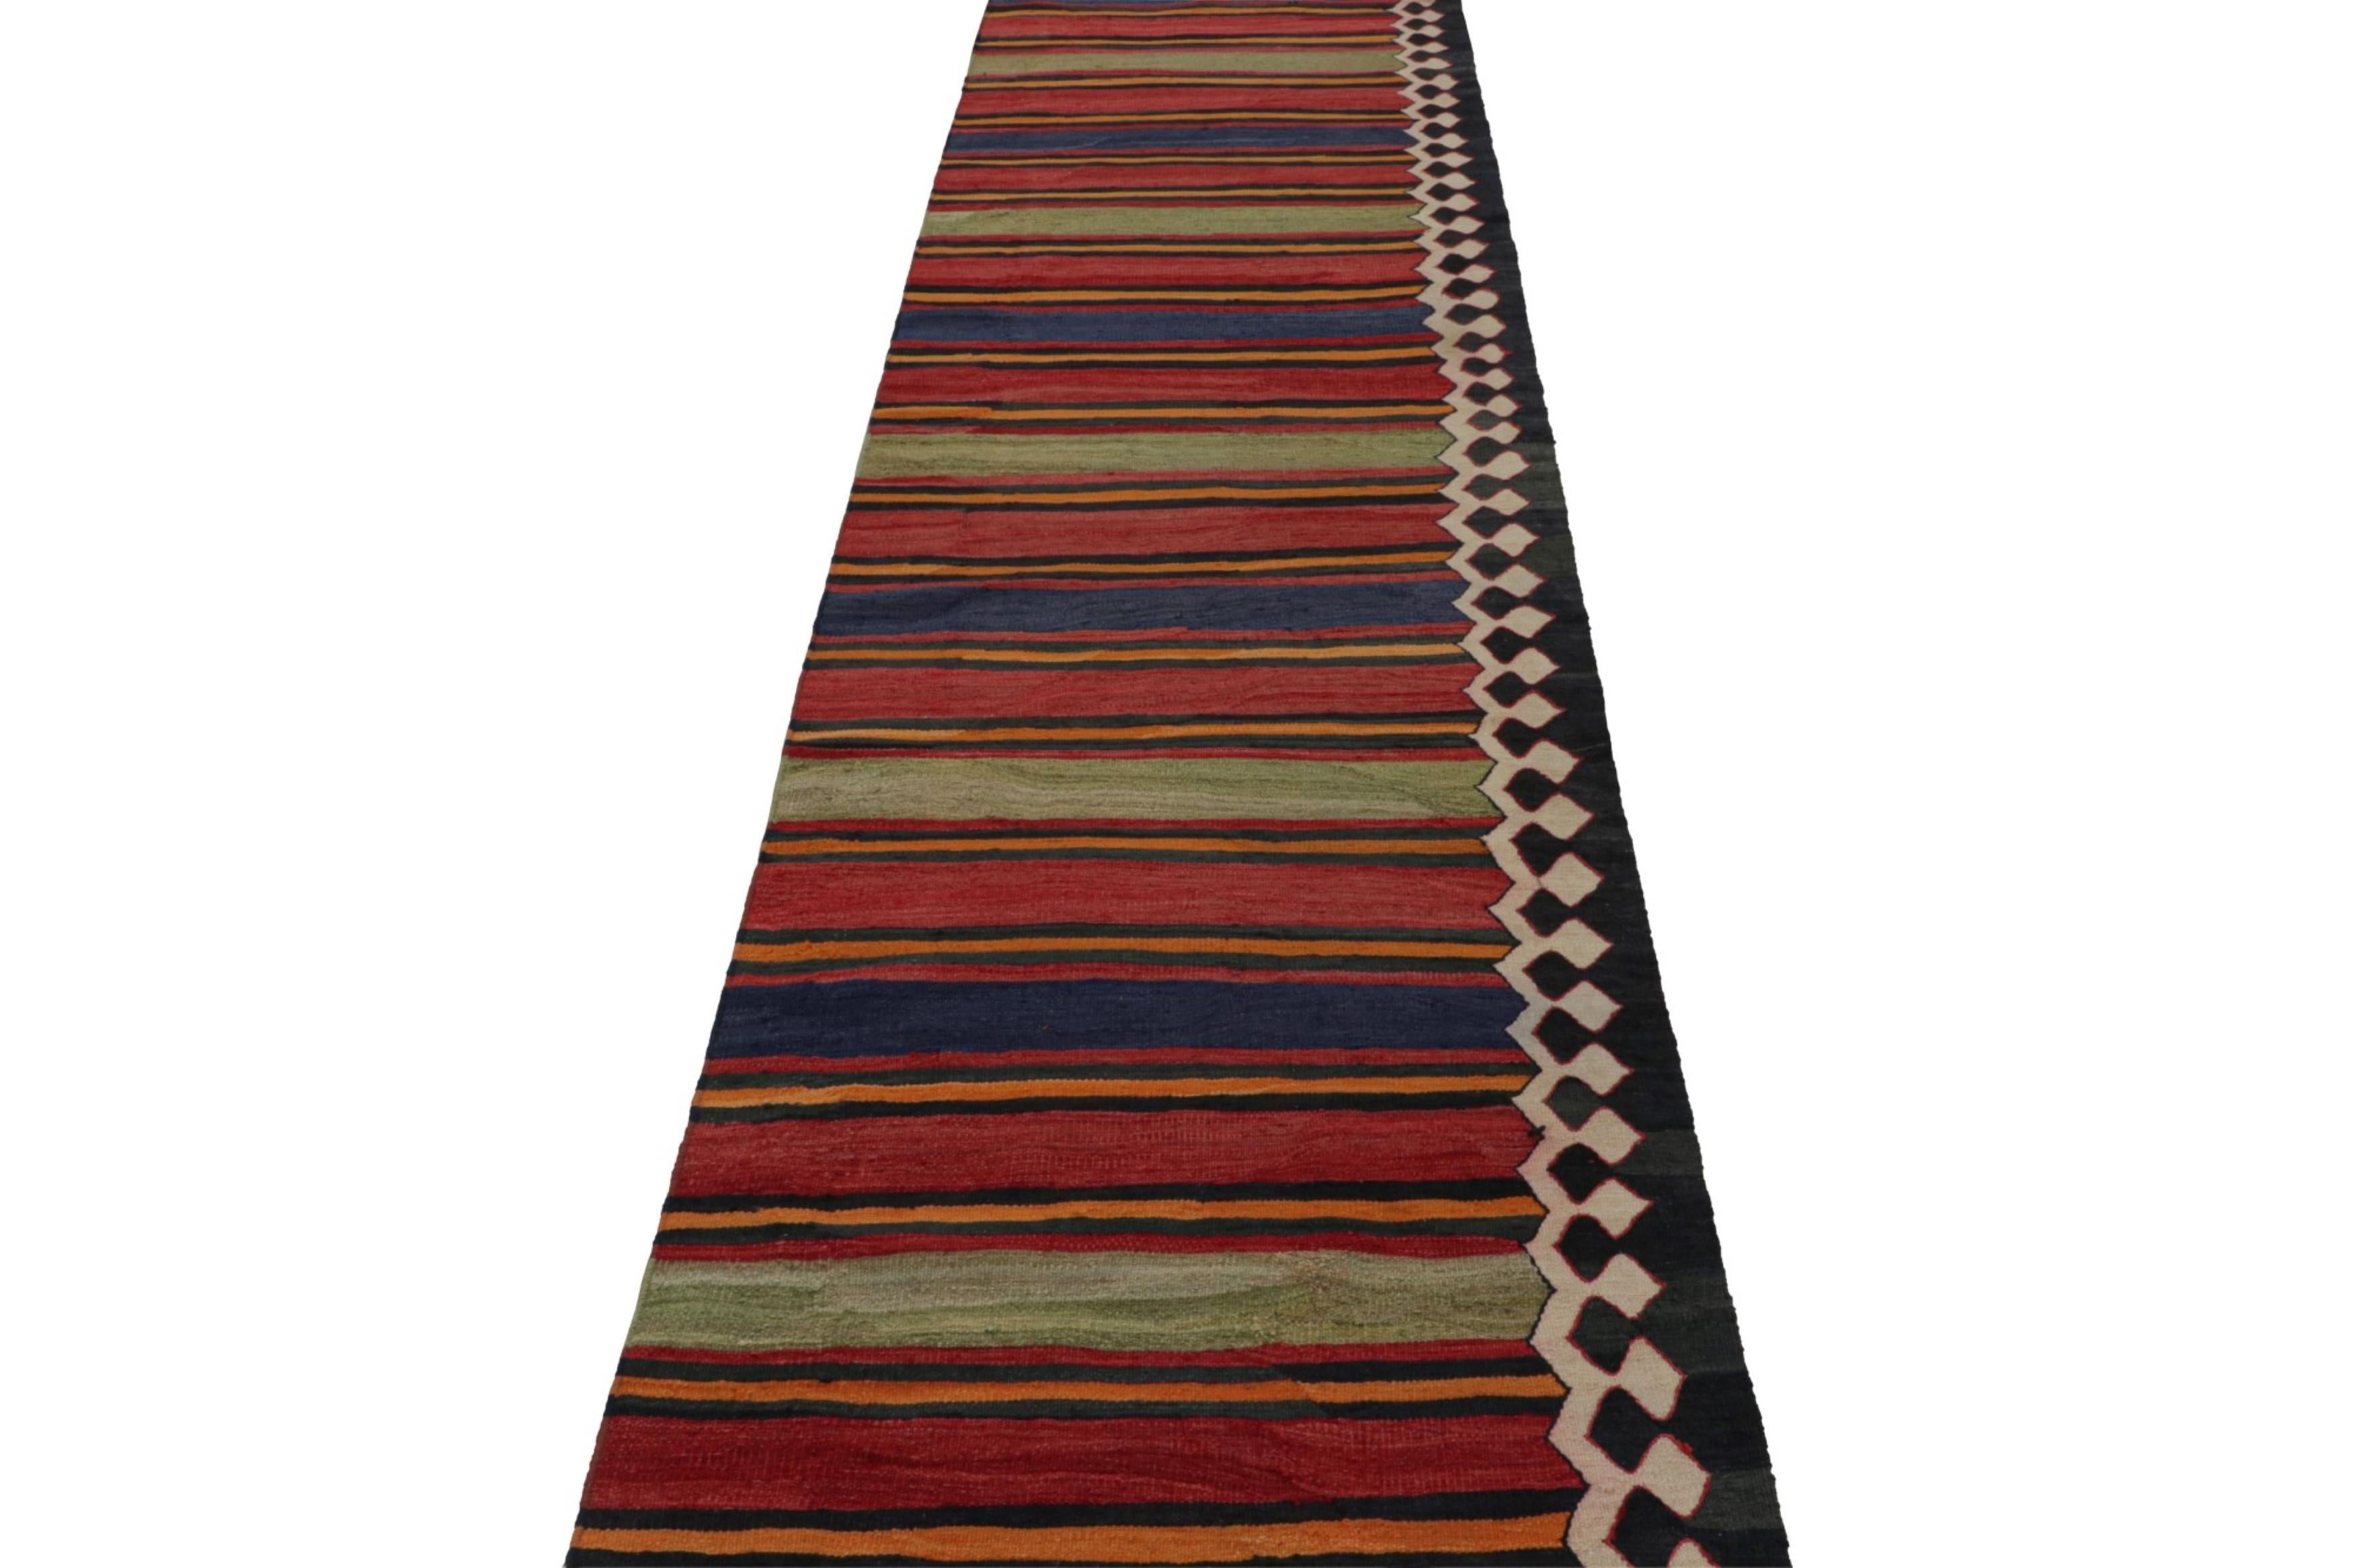 Hand-Knotted Vintage Afghan Tribal Kilim Runner Rug with Colorful Stripes, from Rug & Kilim For Sale